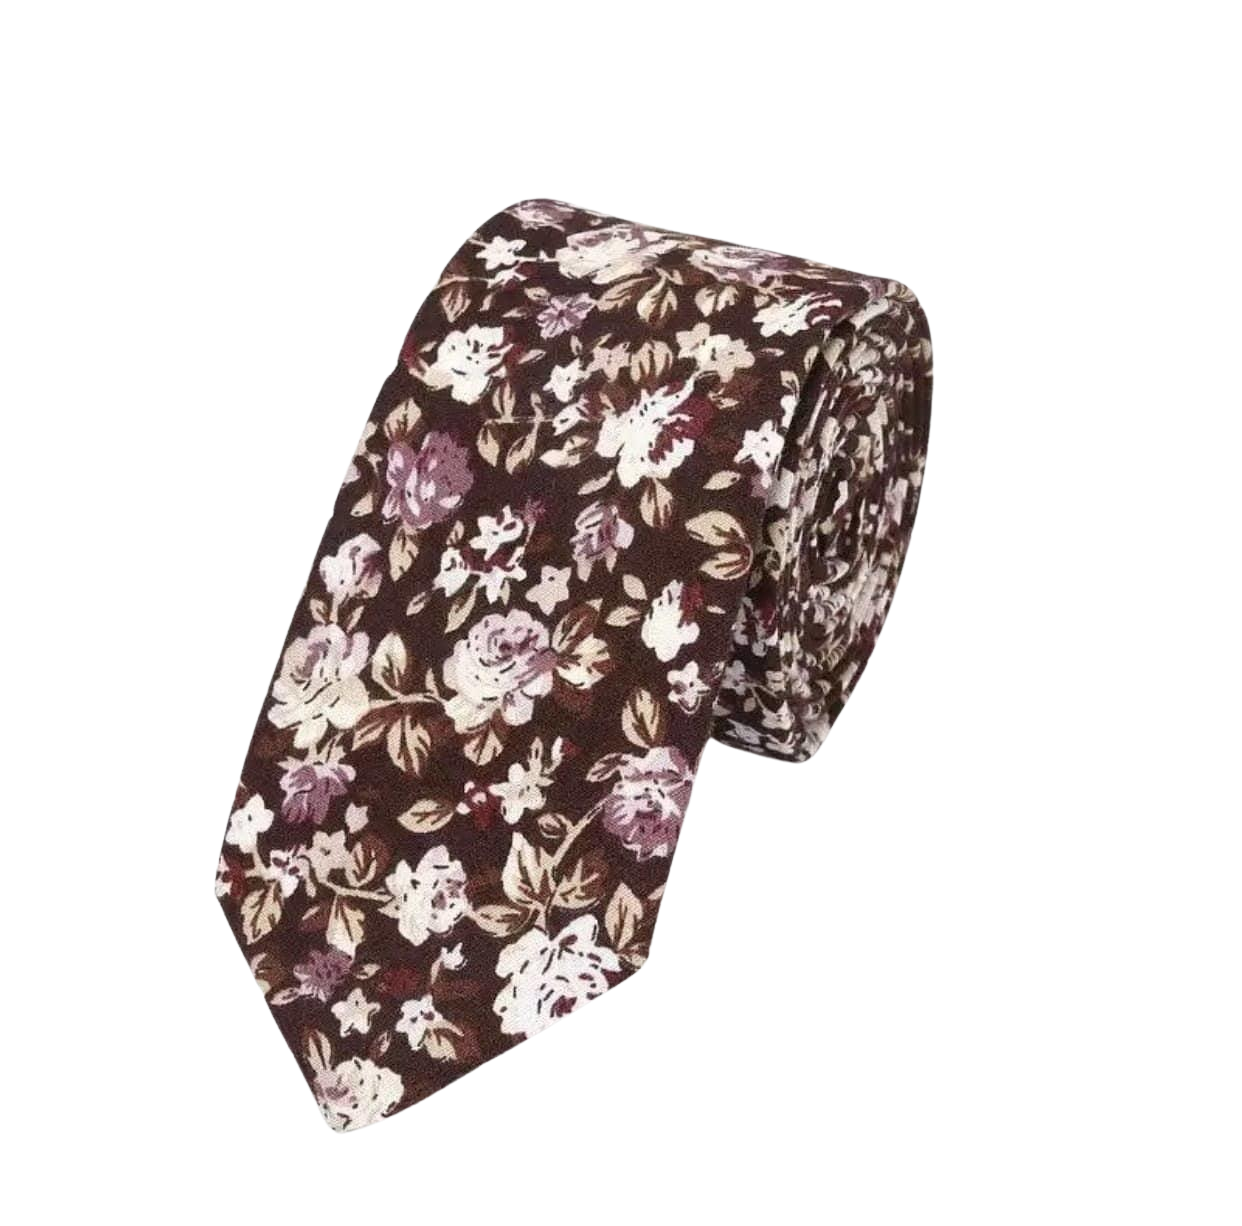 Brown Floral Tie 2.36&quot; ALFRED - MYTIESHOP-Neckties-Brown Floral Skinny Tie ties print for weddings and events. Great for groom and groomsmen. Styled shoots elopements weddings Flower Skinny ties-Mytieshop. Skinny ties for weddings anniversaries. Father of bride. Groomsmen. Cool skinny neckties for men. Neckwear for prom, missions and fancy events. Gift ideas for men. Anniversaries ideas. Wedding aesthetics. Flower ties. Dry flower ties.